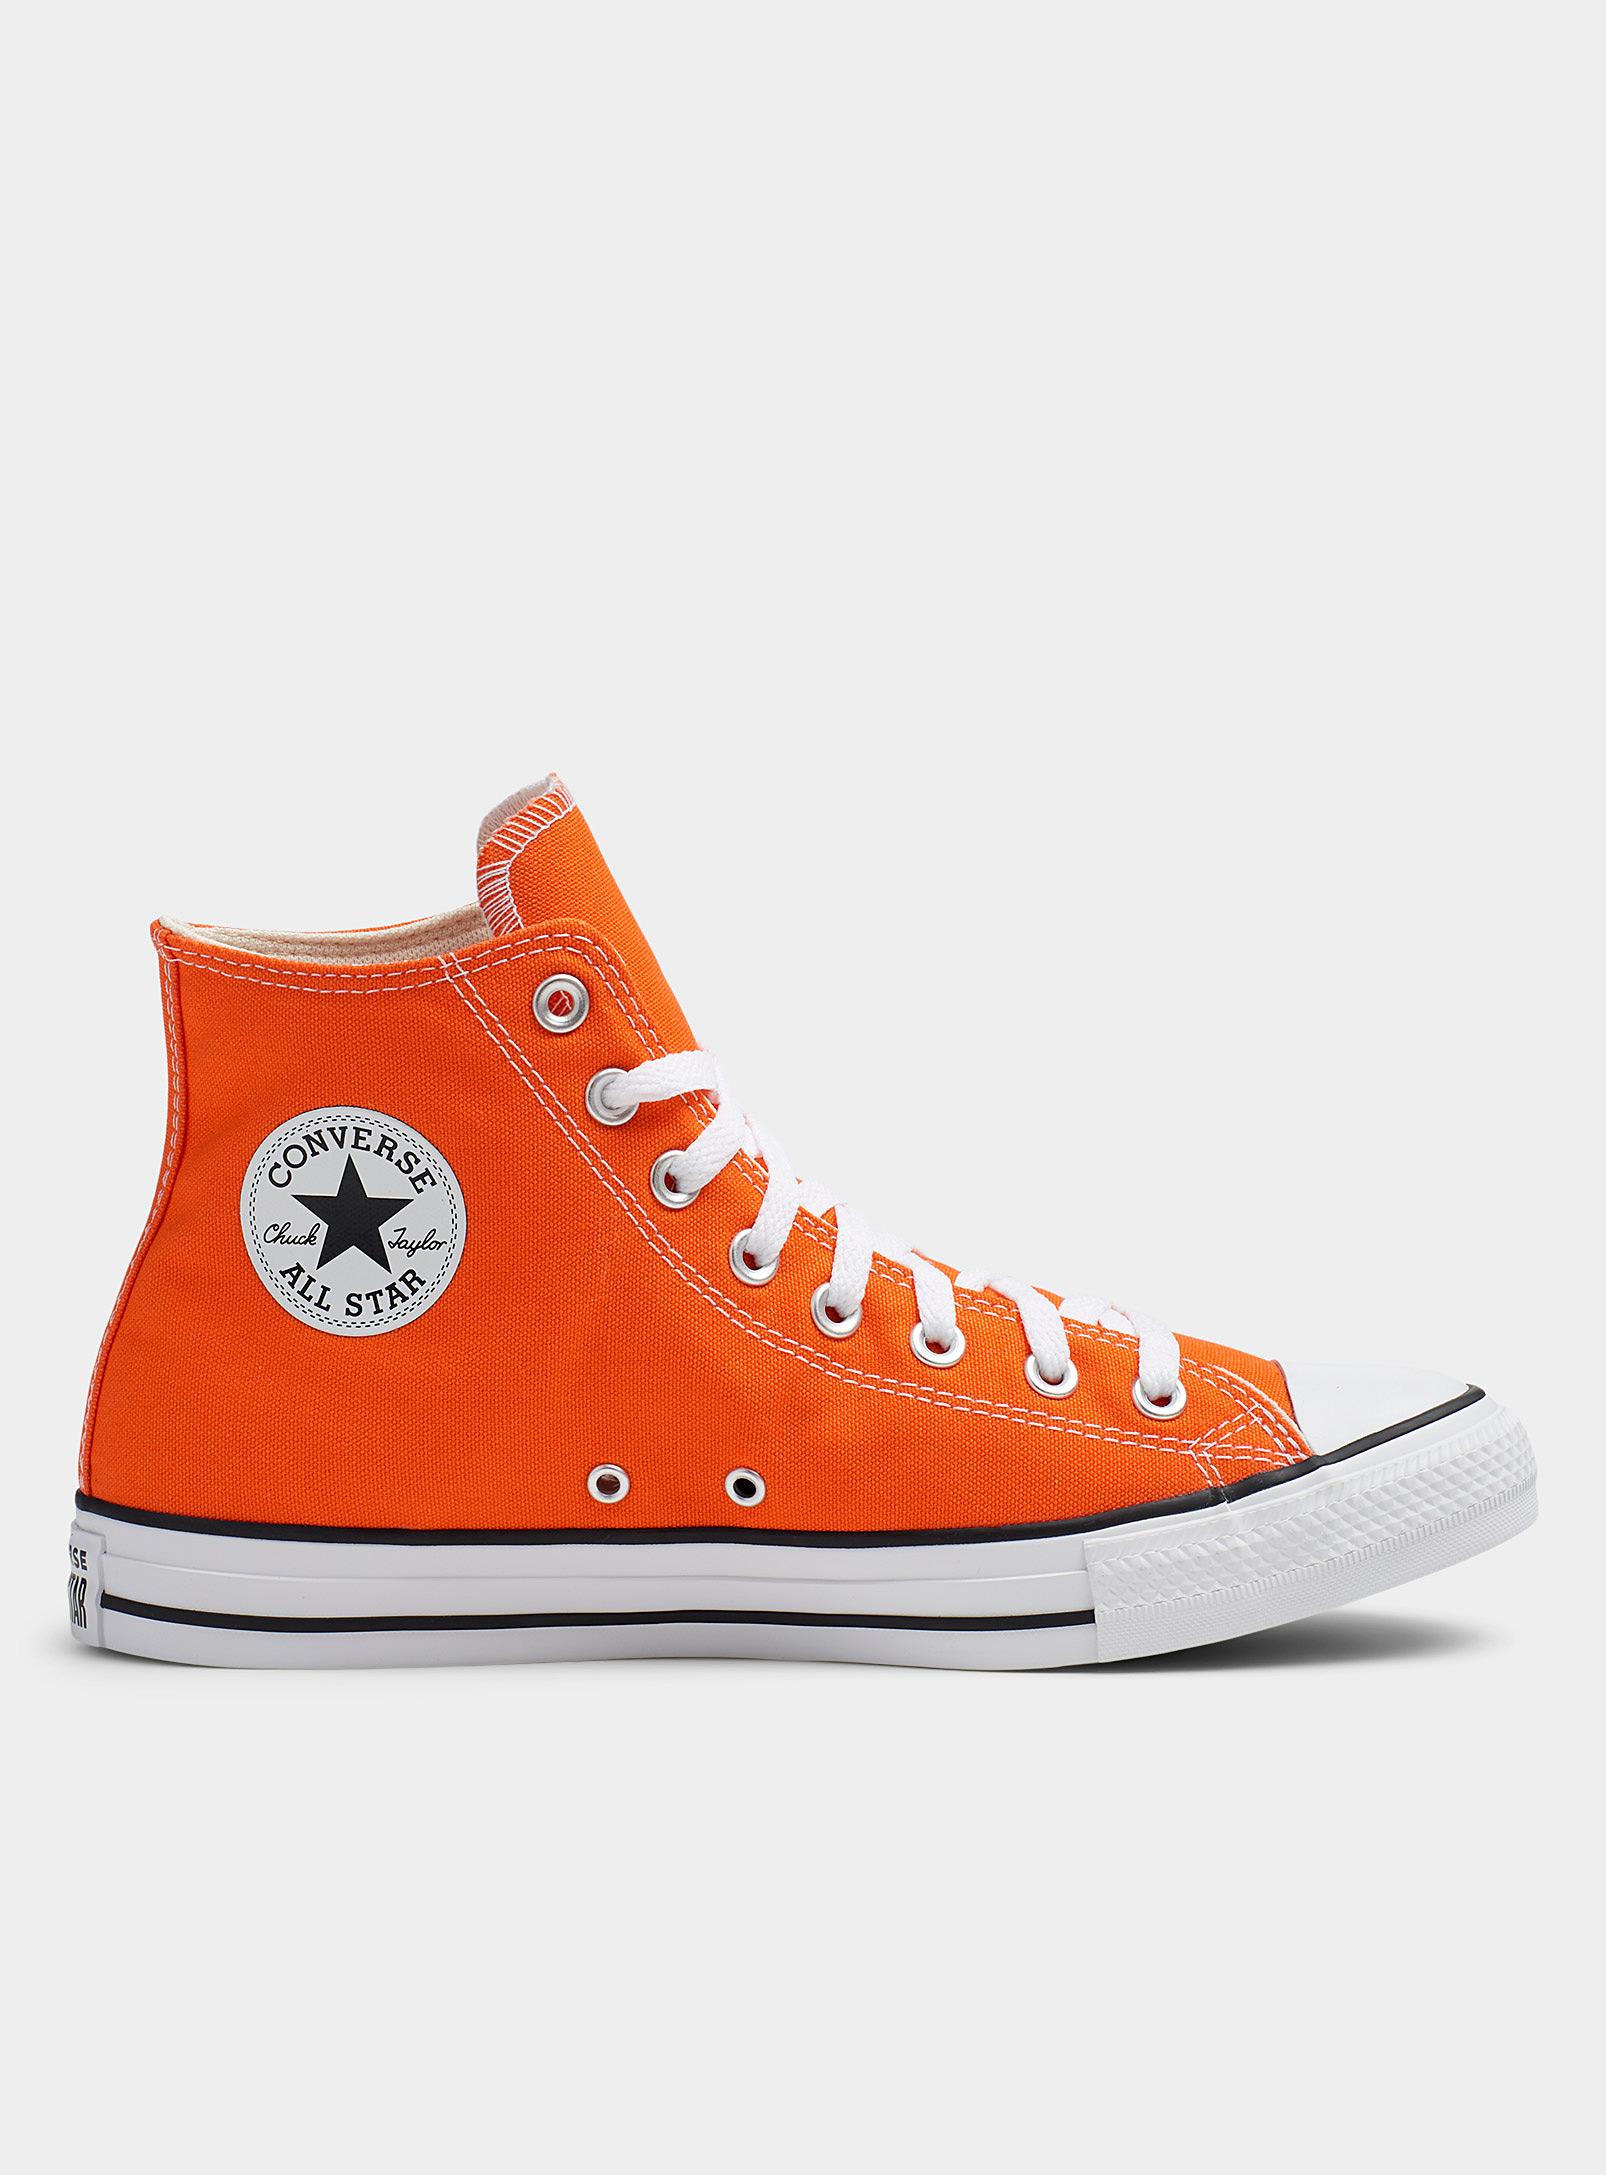 Orange Chuck Taylor All Star High Top Sneakers Men for Men | Lyst